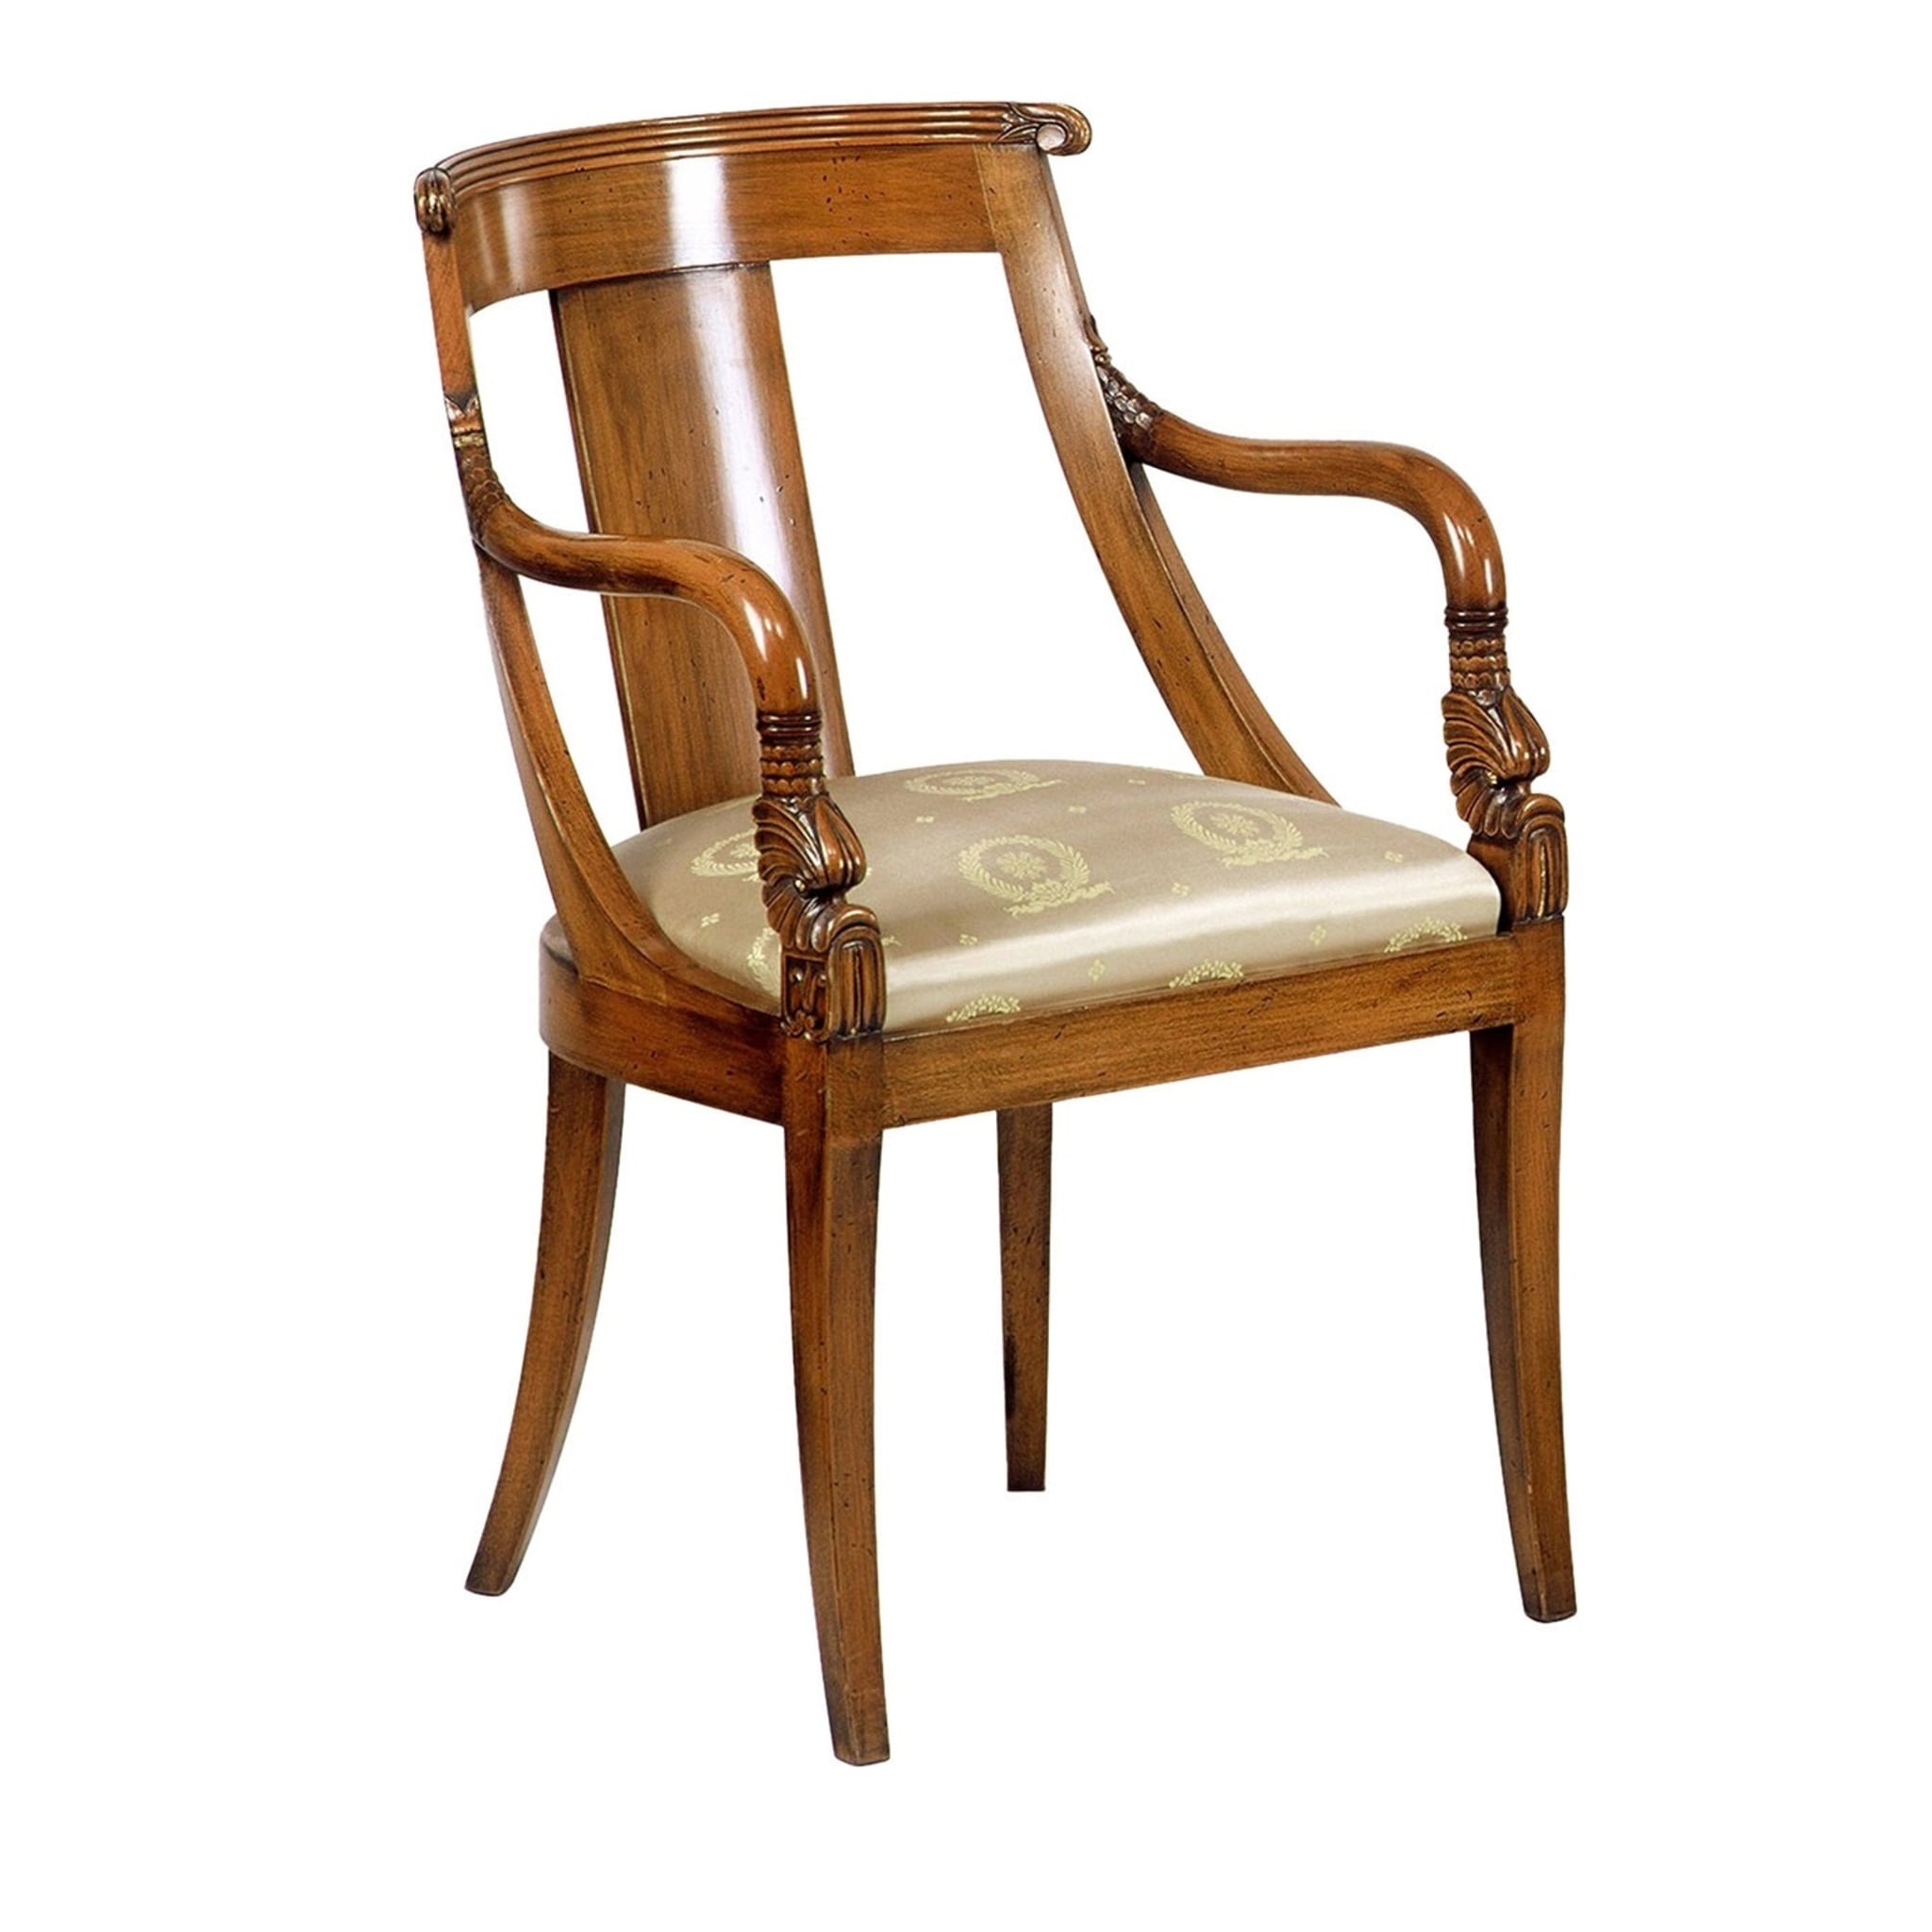 French Empire-Style Cushioned Beech Chair - Main view